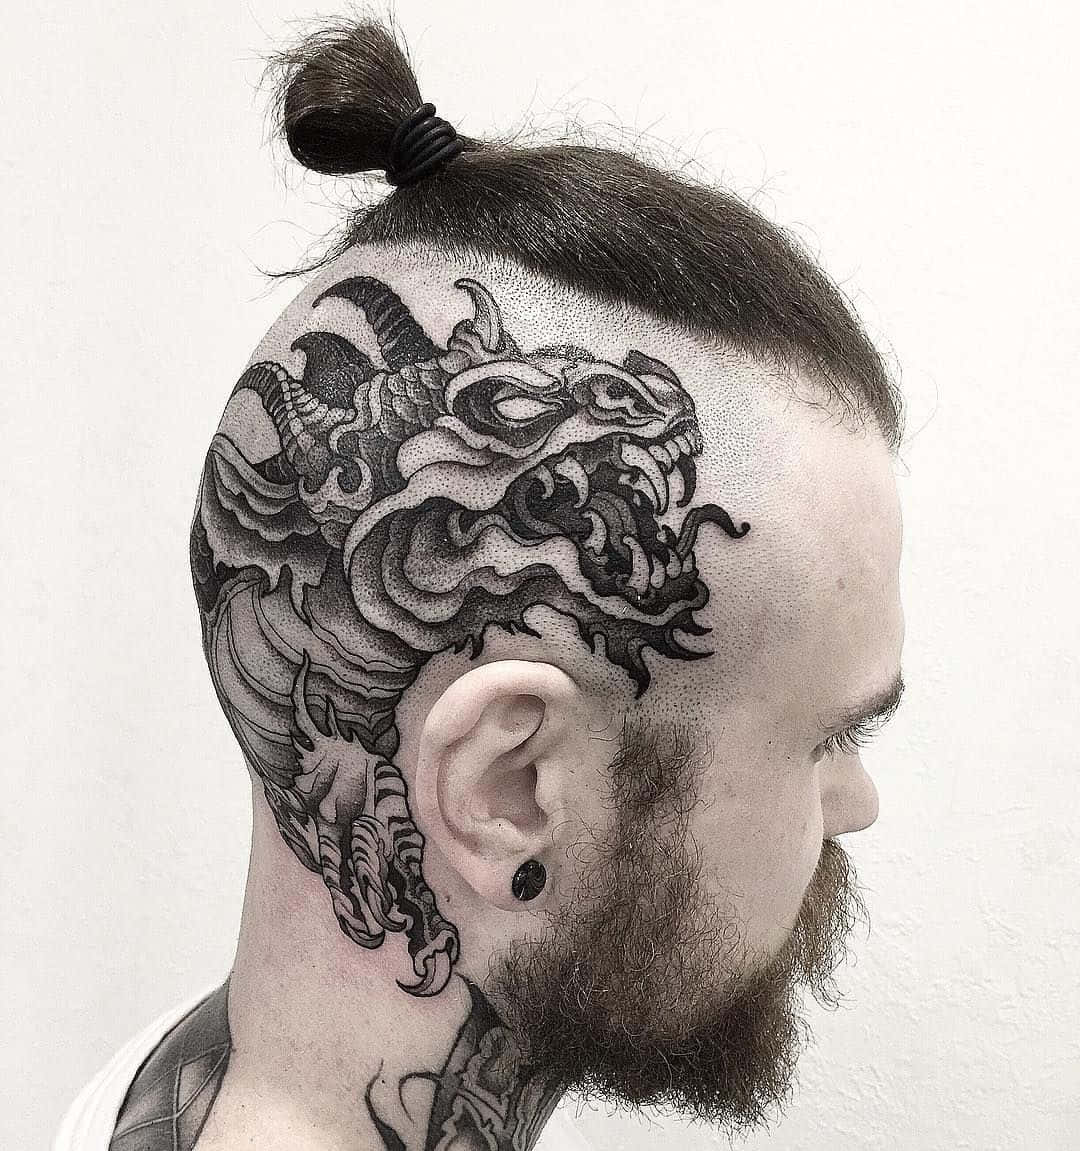 A Man With A Dragon Tattoo On His Head